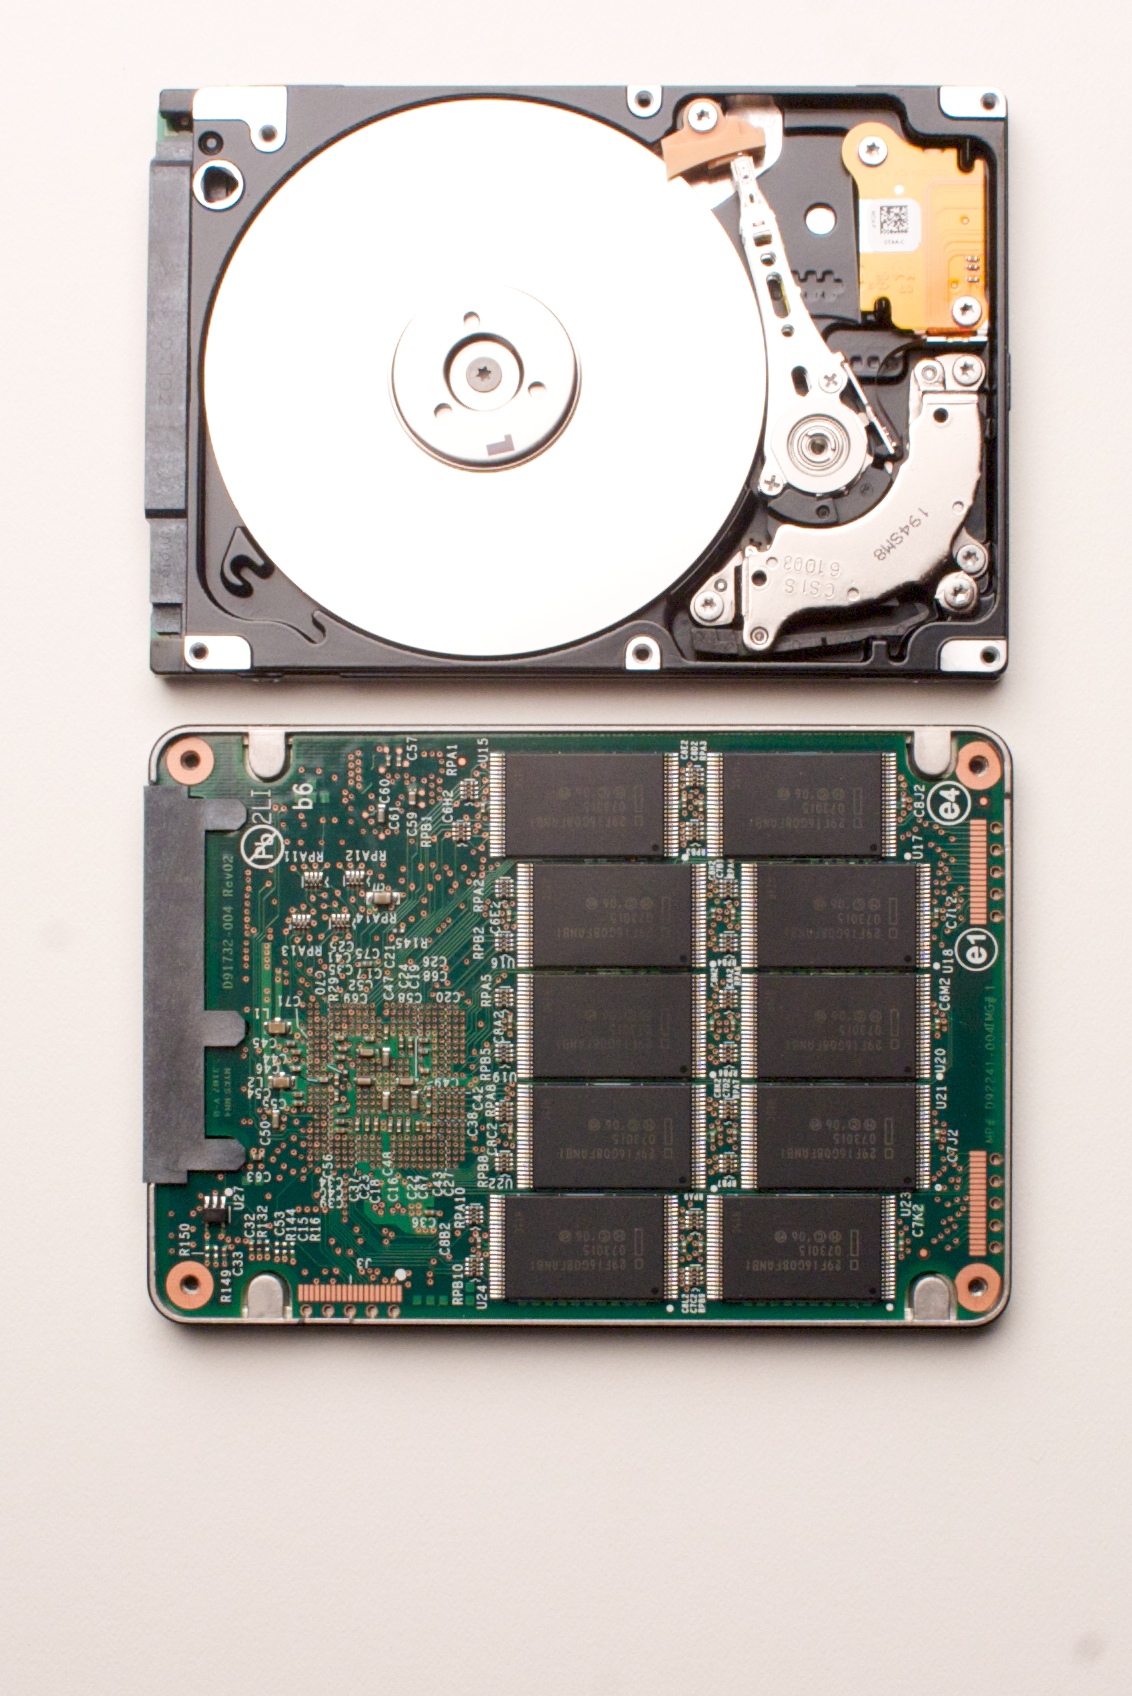 A conventional hard drive and a solid state (Photo by IntelP